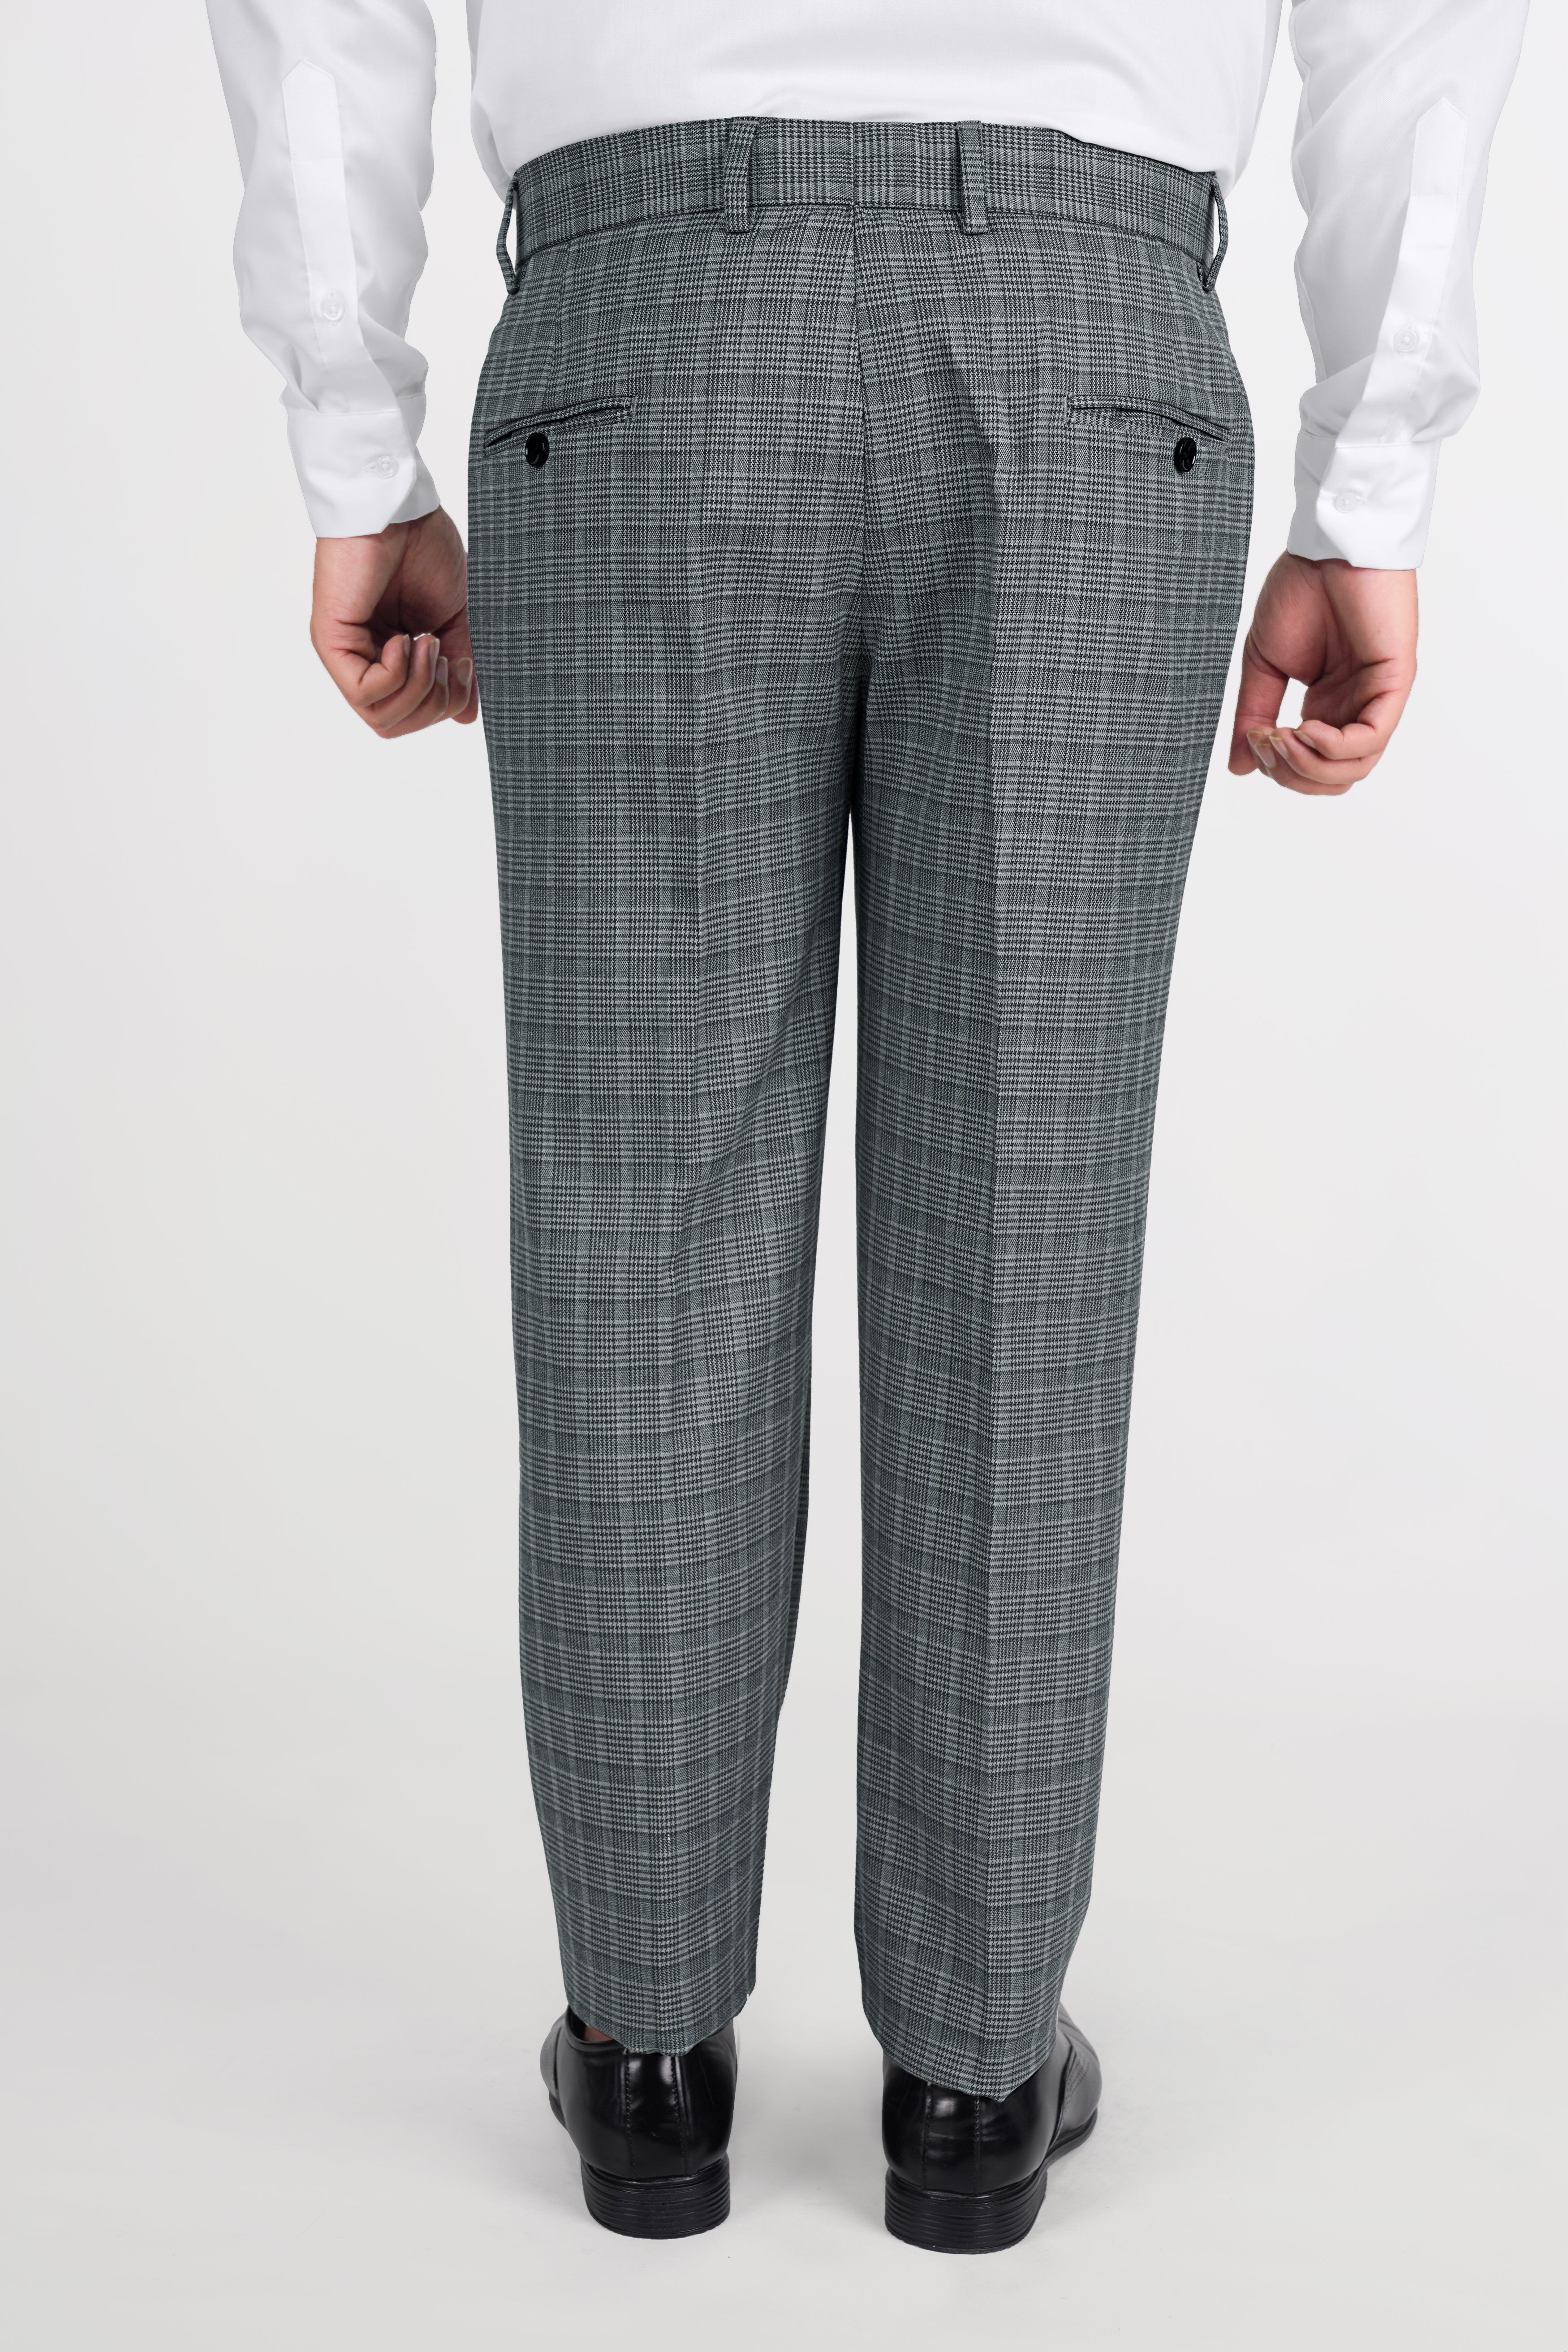 Oslo Gray Checkered Wool Rich Bandhgala Designer Stretchable Traveler Suit ST2801-D38-36,ST2801-D38-38,ST2801-D38-40,ST2801-D38-42,ST2801-D38-44,ST2801-D38-46,ST2801-D38-48,ST2801-D38-50,ST2801-D38-52,ST2801-D38-54,ST2801-D38-56,ST2801-D38-58,ST2801-D38-60